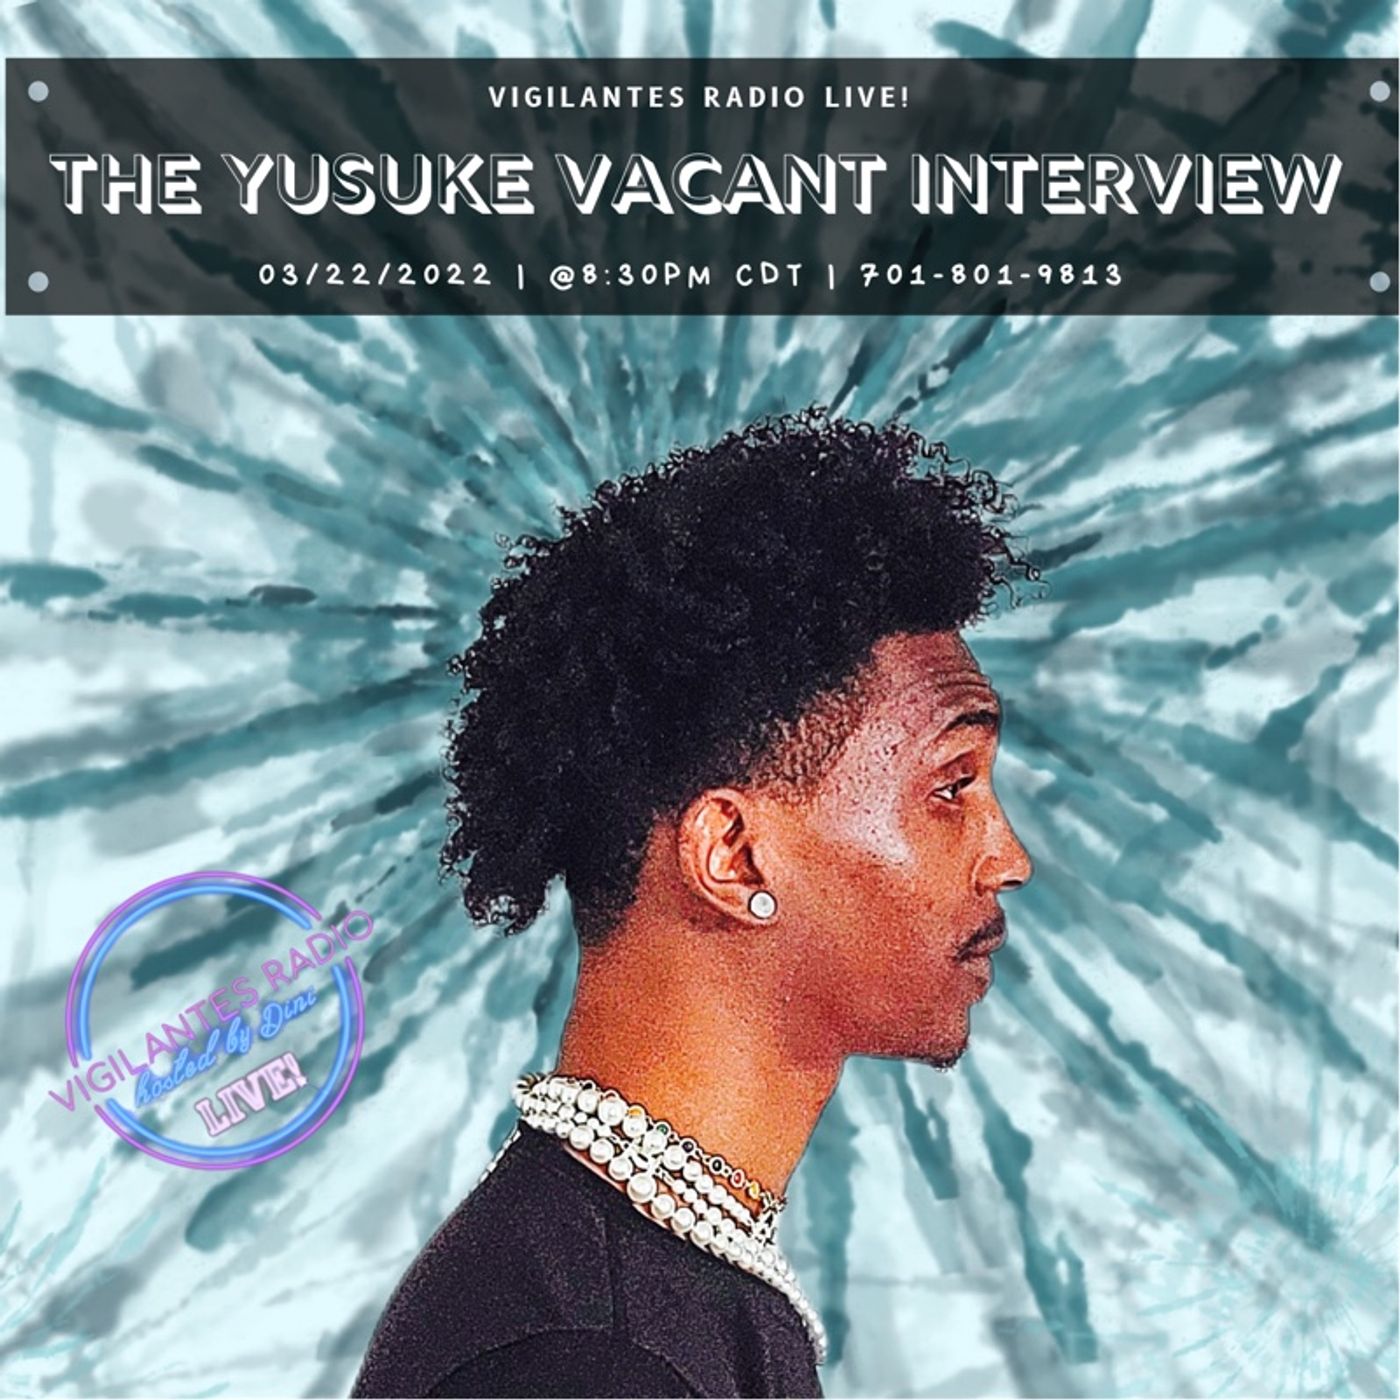 The Yusuke Vacant Interview. Image